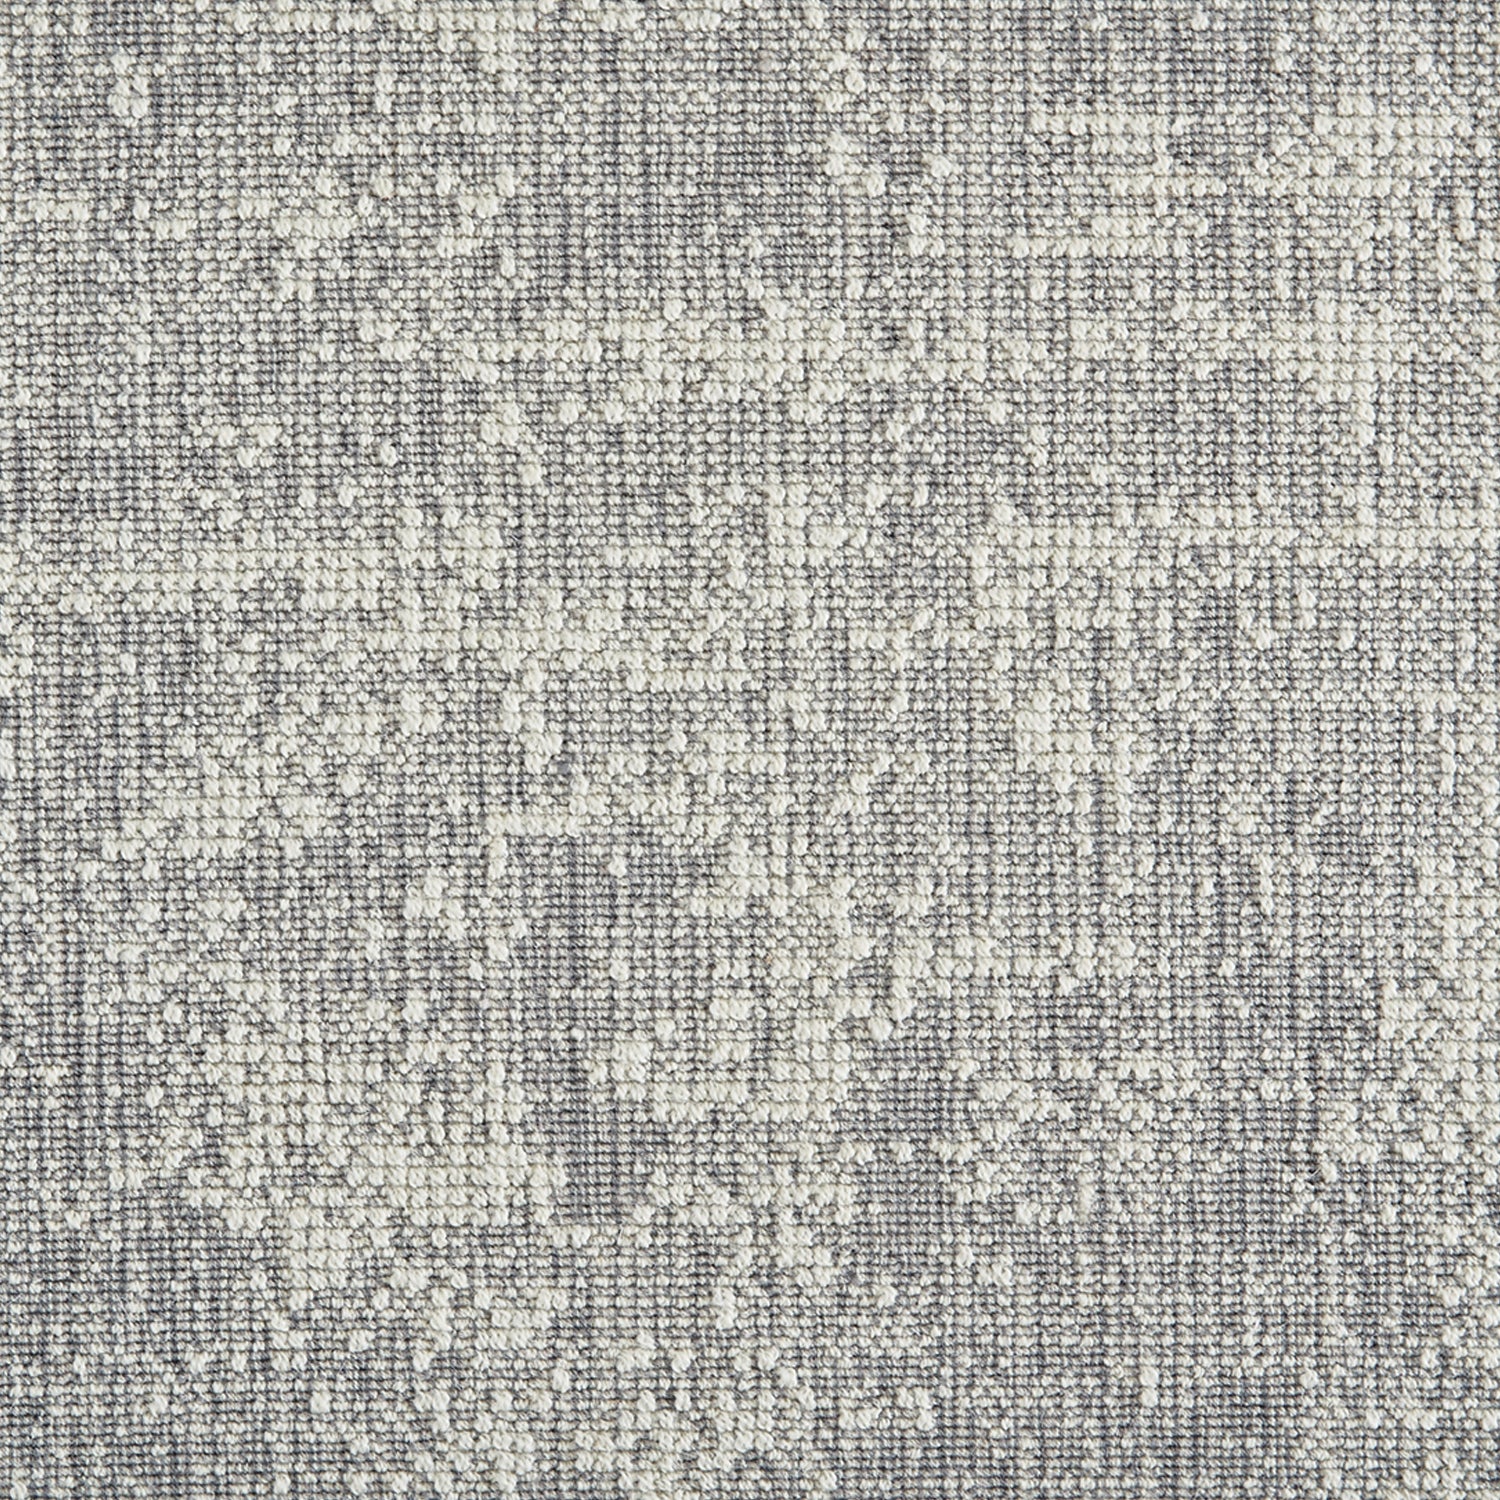 Wool-blend broadloom carpet swatch in a dimensional abstract weave in gray and cream.